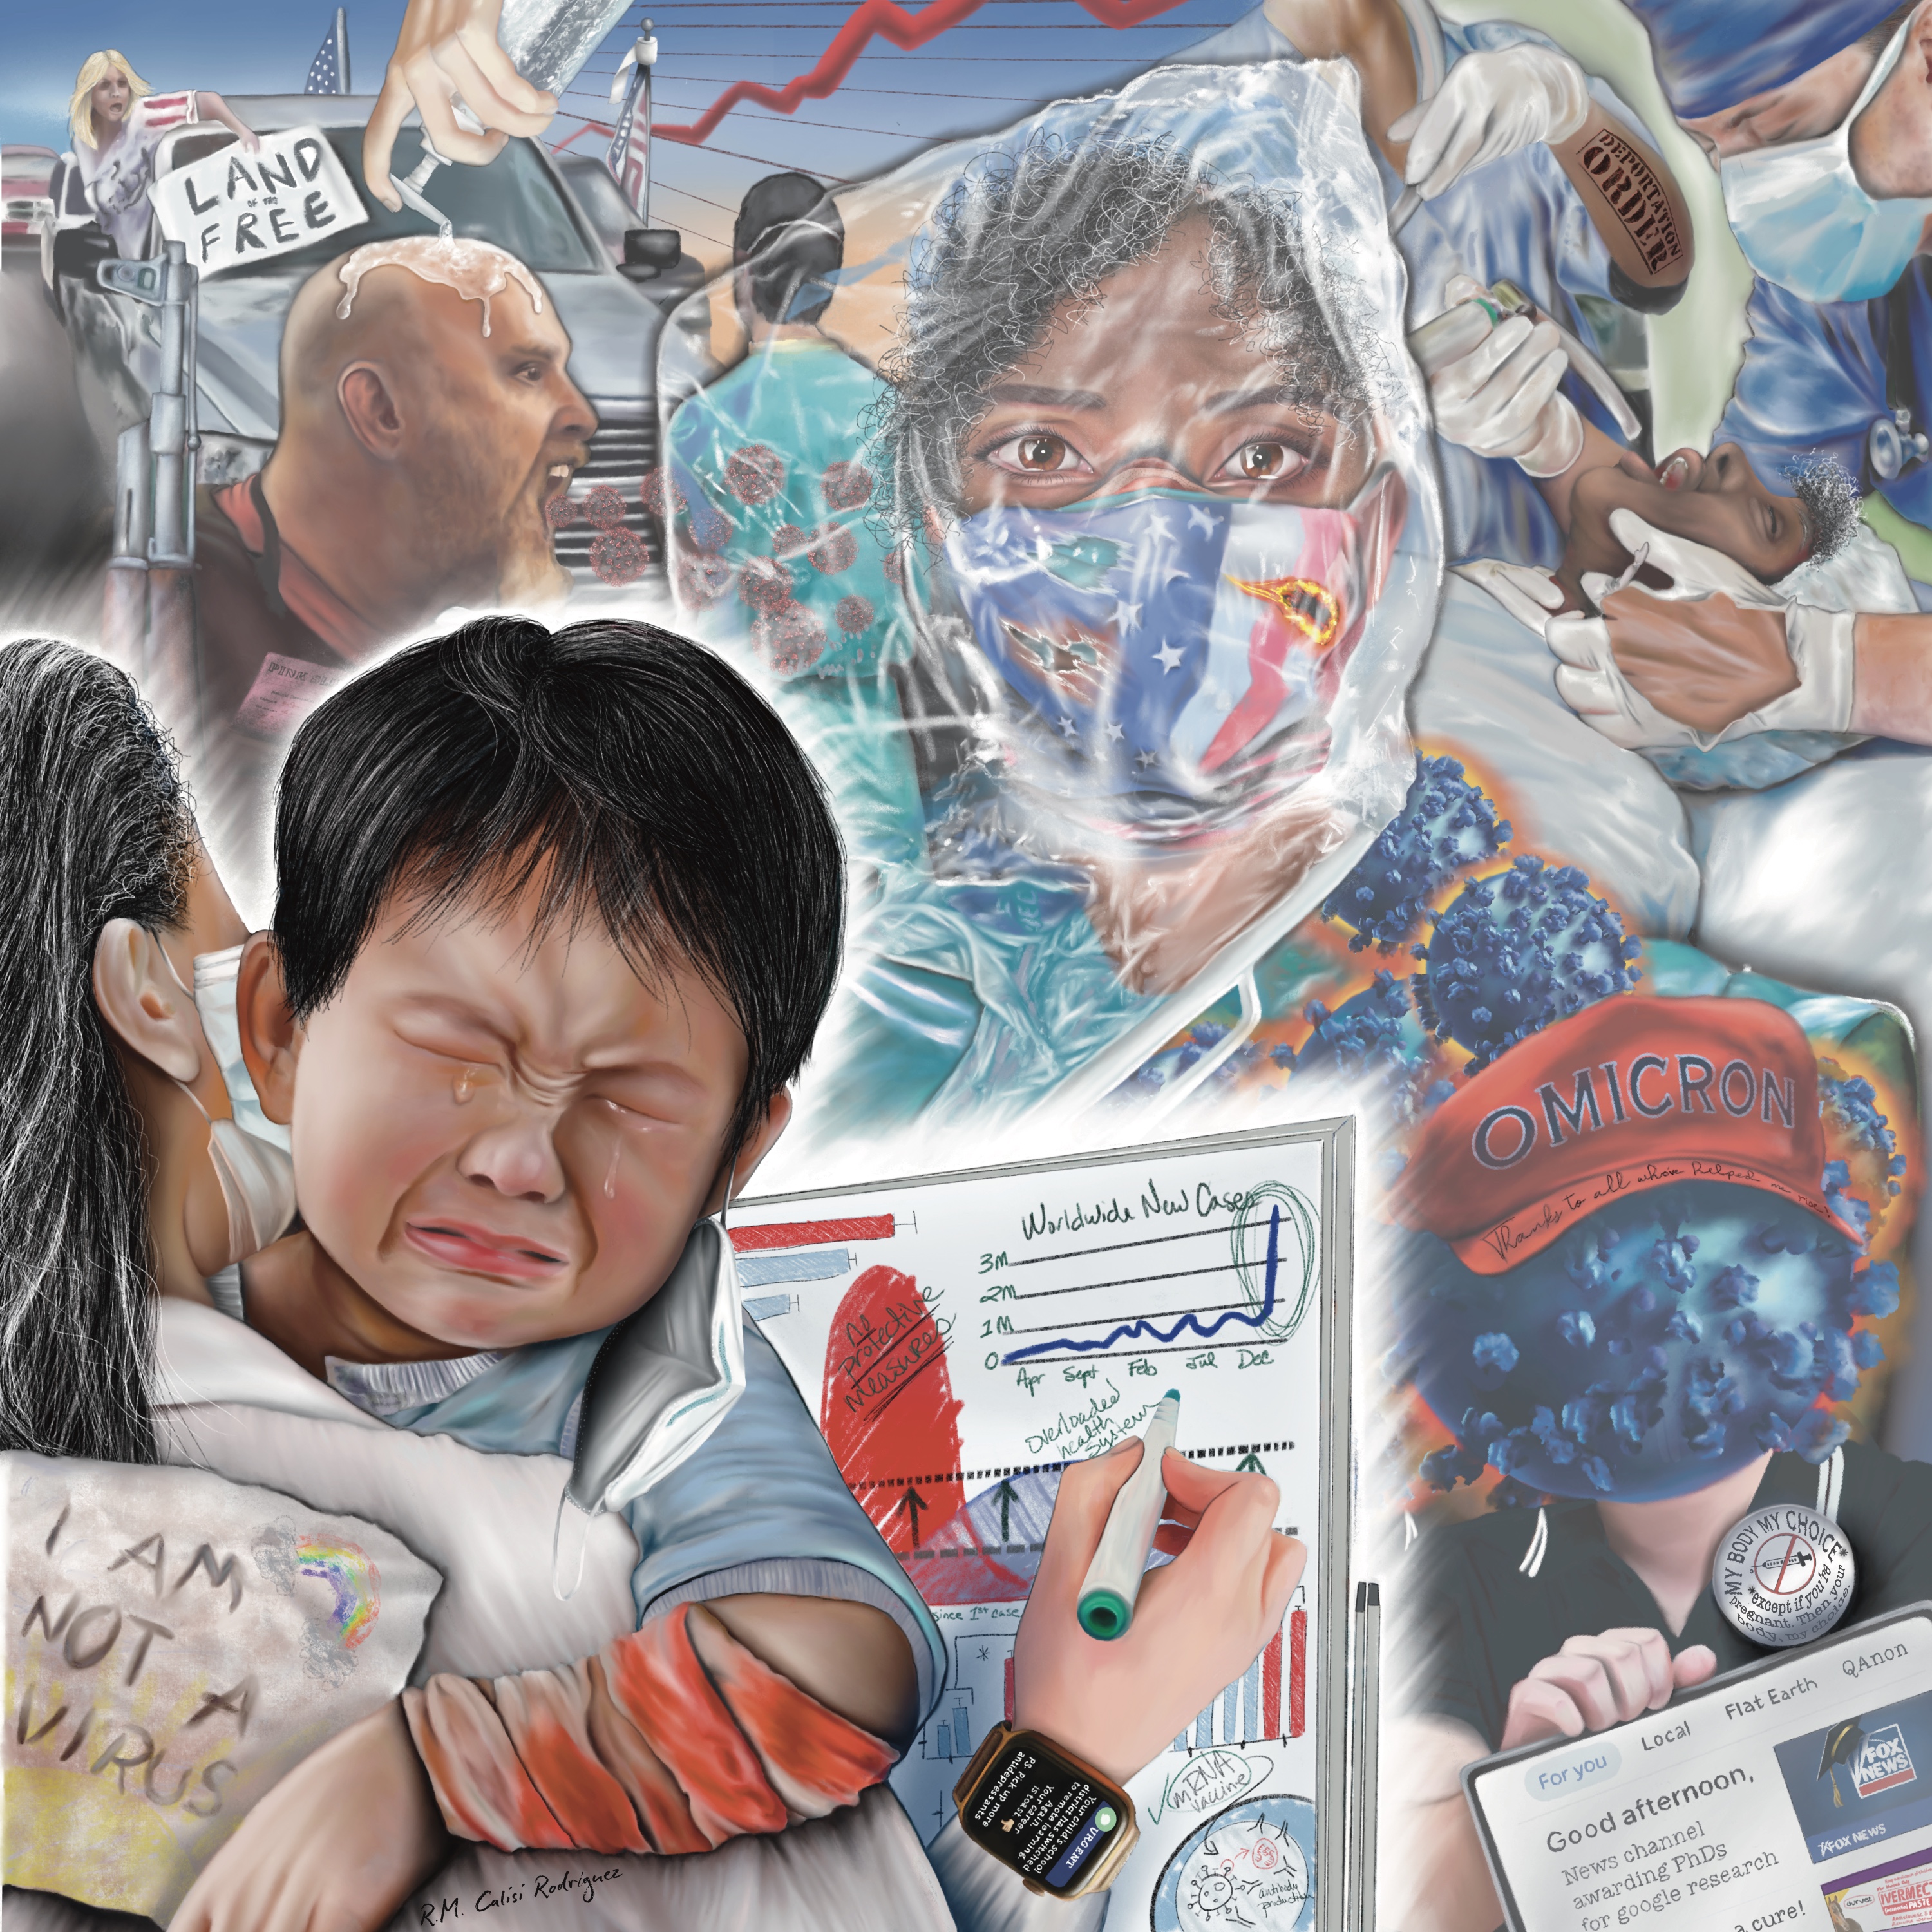 Mural of images that include an asian baby crying holding a piece of paper that says “I am not a virus”, a bald man screaming whose bald head is being doused with hand sanitizer, a woman wearing a red, blue, and white mask, COVID variant wearing a cap that says “OMICRON”, and a truck with a blonde woman holding a sign that says “LAND of the FREE” 